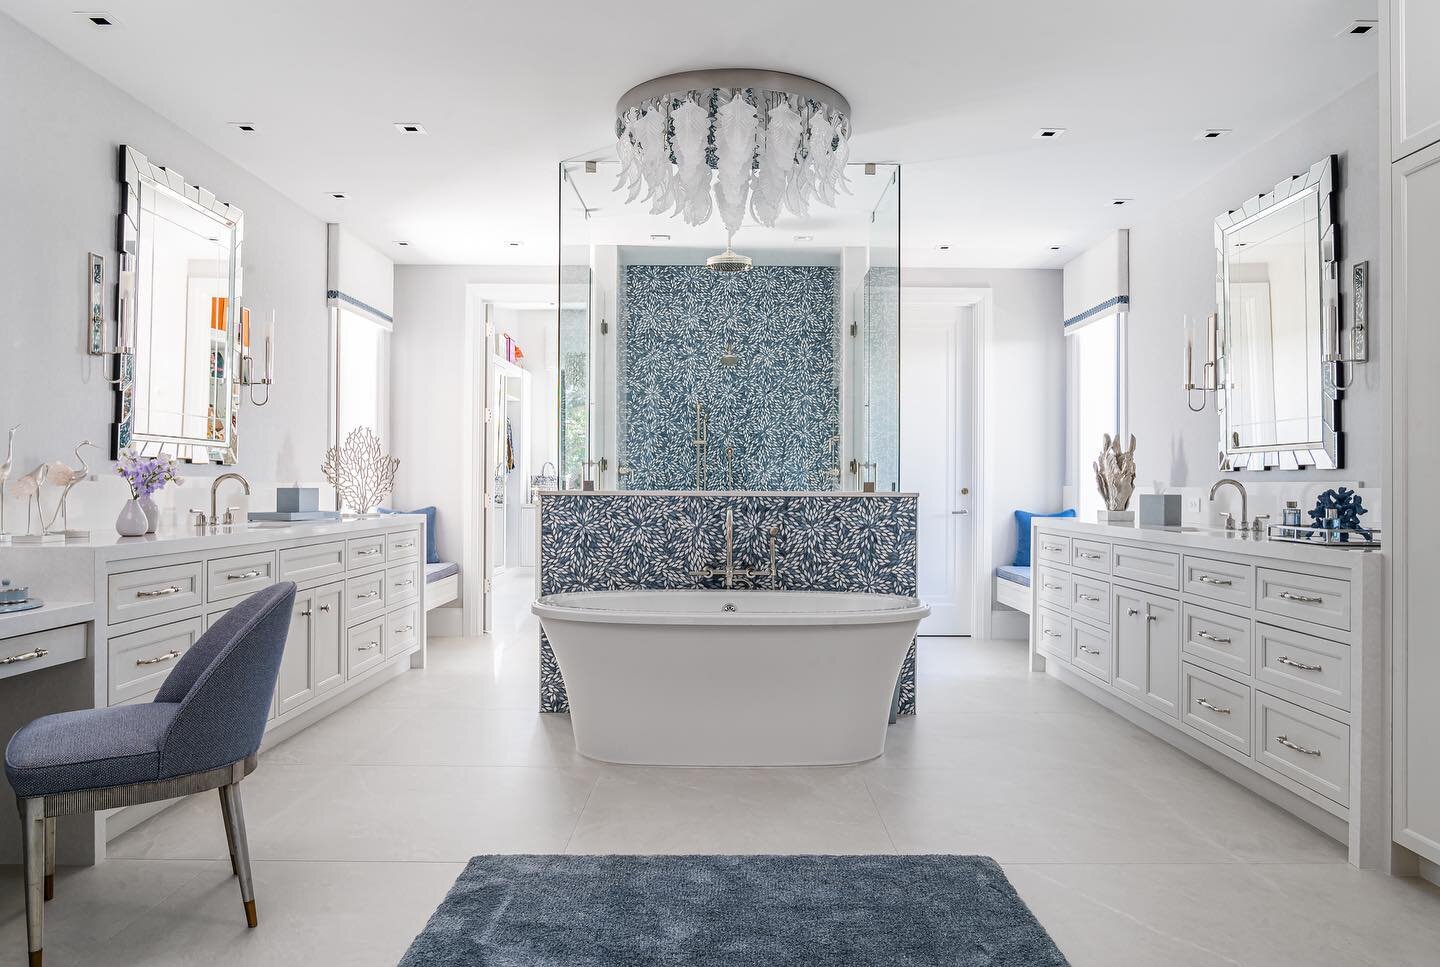 Swipe ⬅️⬅️⬅️ for the befores of this primary bath at our #bluelooksgoodonyou project. From 🤢 to 🤩! 

Design @erinacantuinteriors 
📸 @venjhaminreyes 
Builder: Wadsworth Developers

#primarybathroom #masterbathroom #masterbath #renovation #masterbat